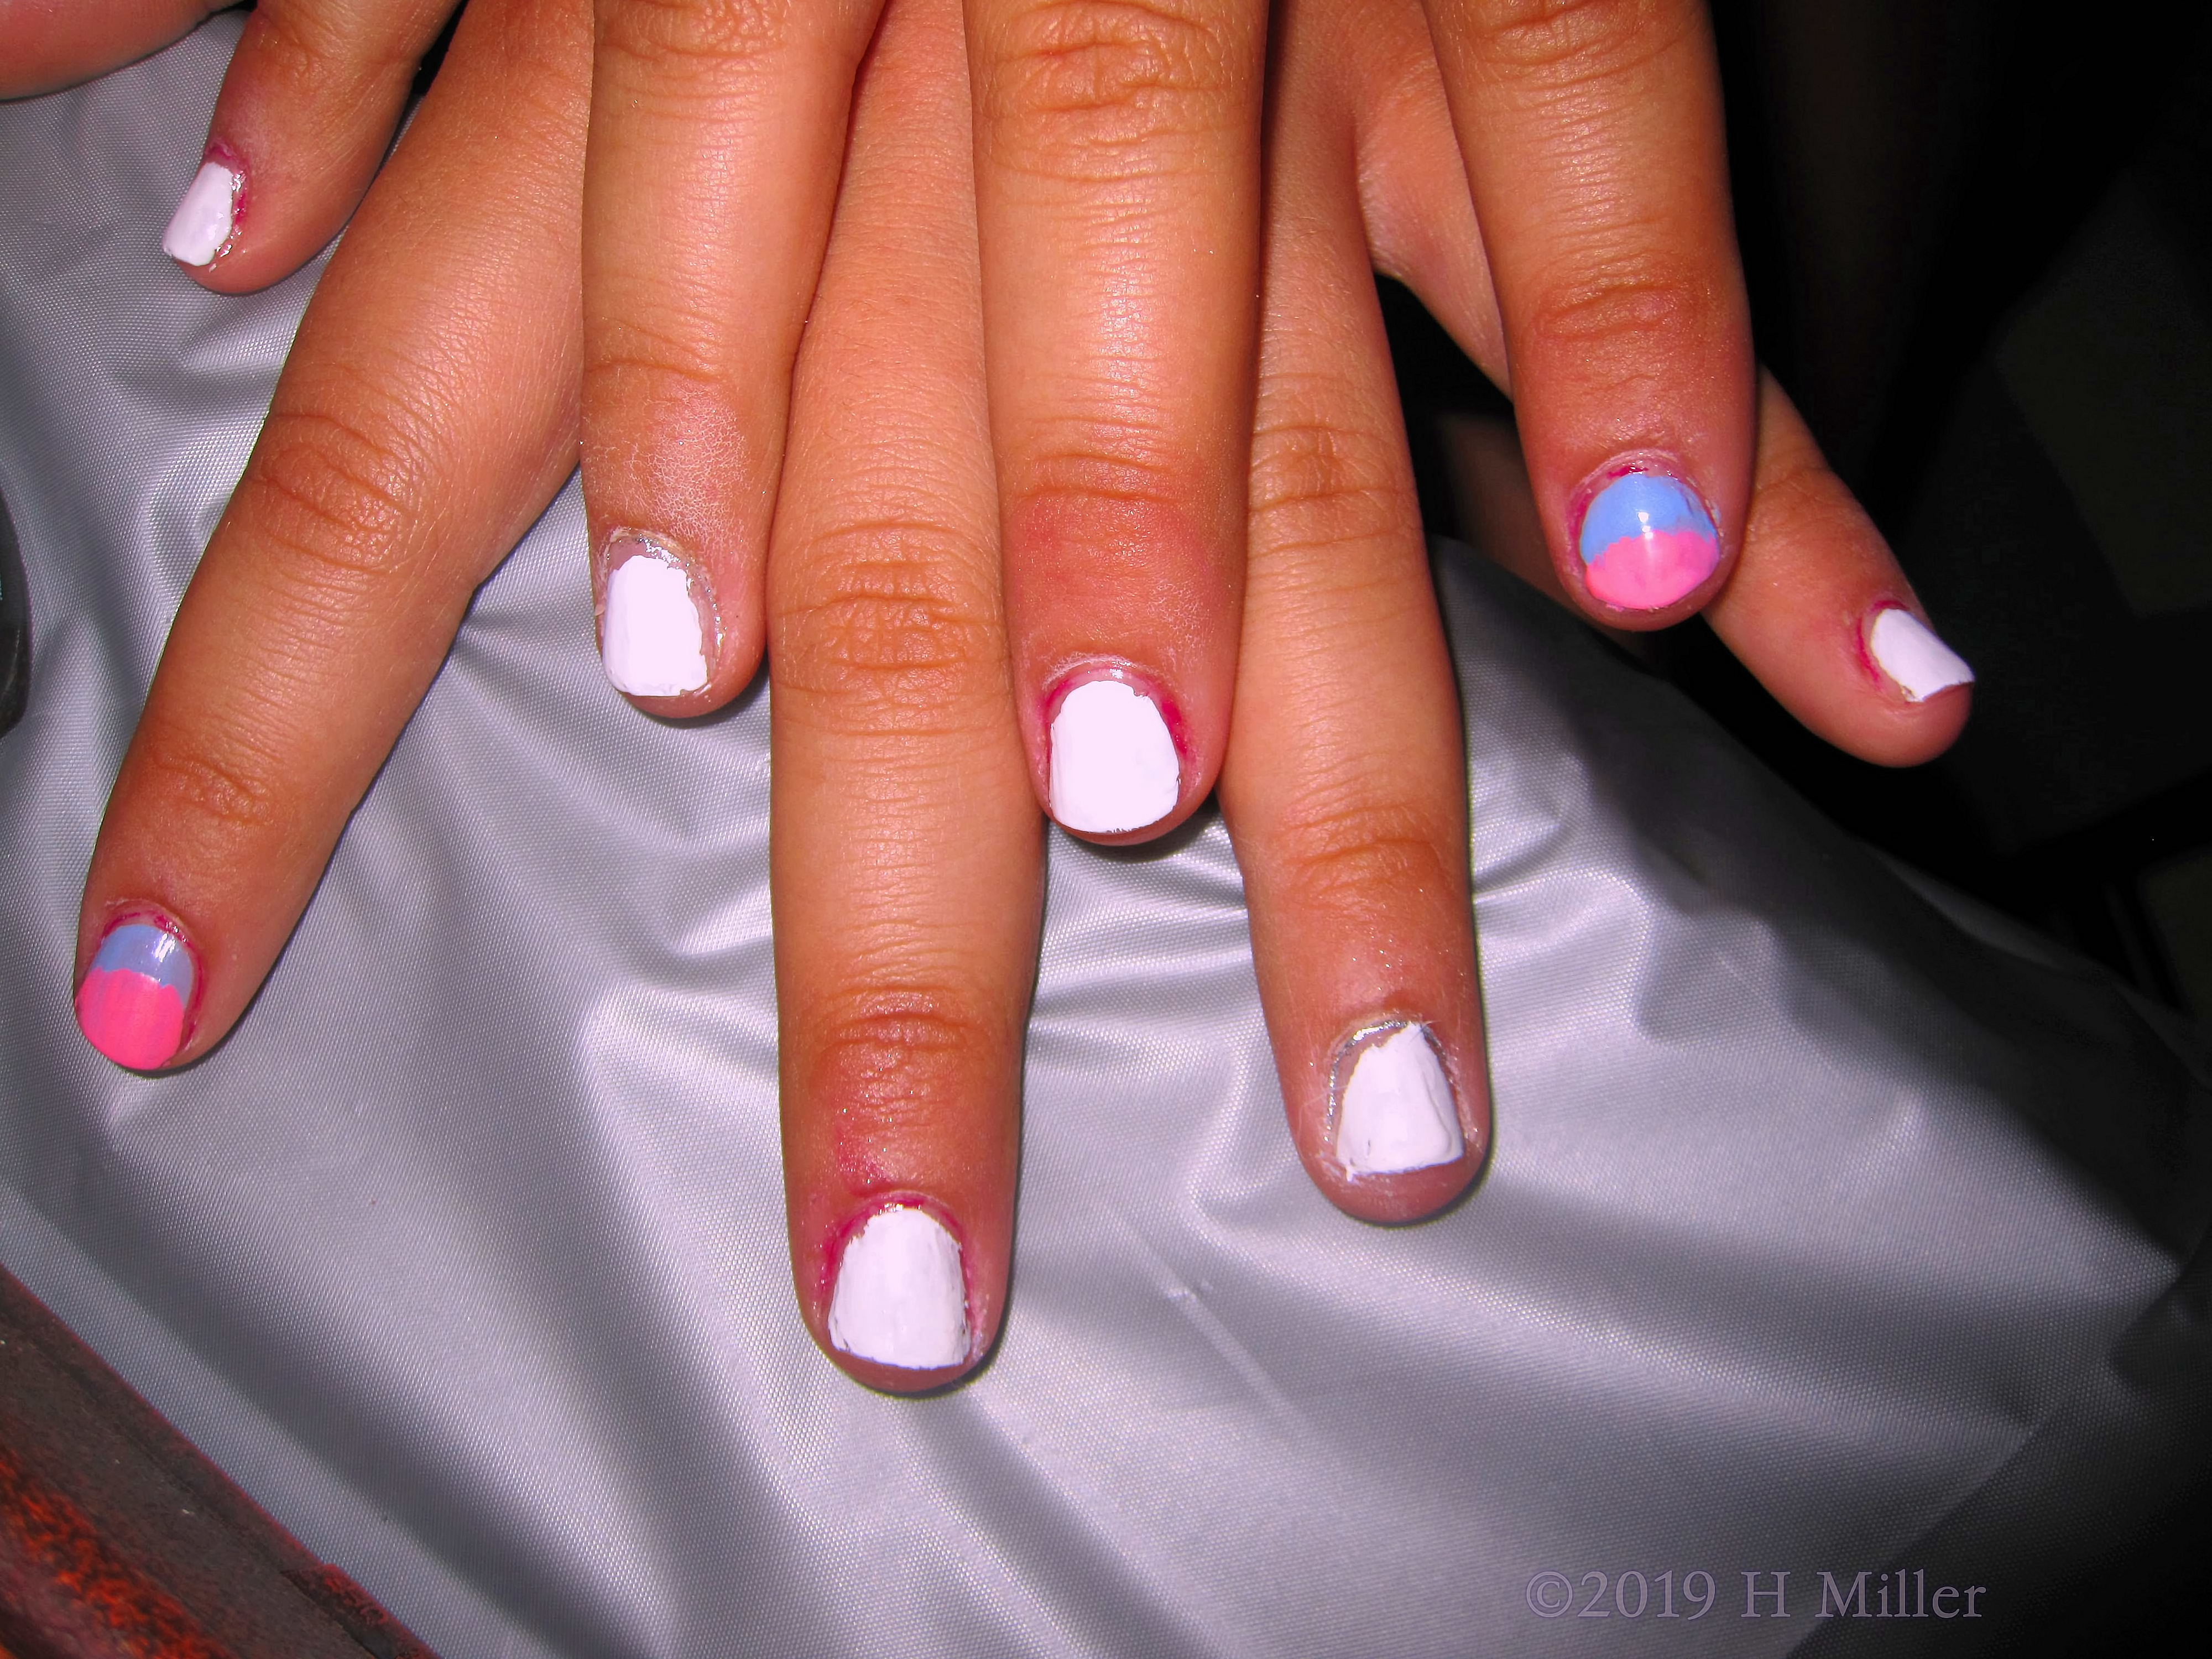 A Cute Kids Manicure With White, And A Pink And  Blue Ombre Nail Design.